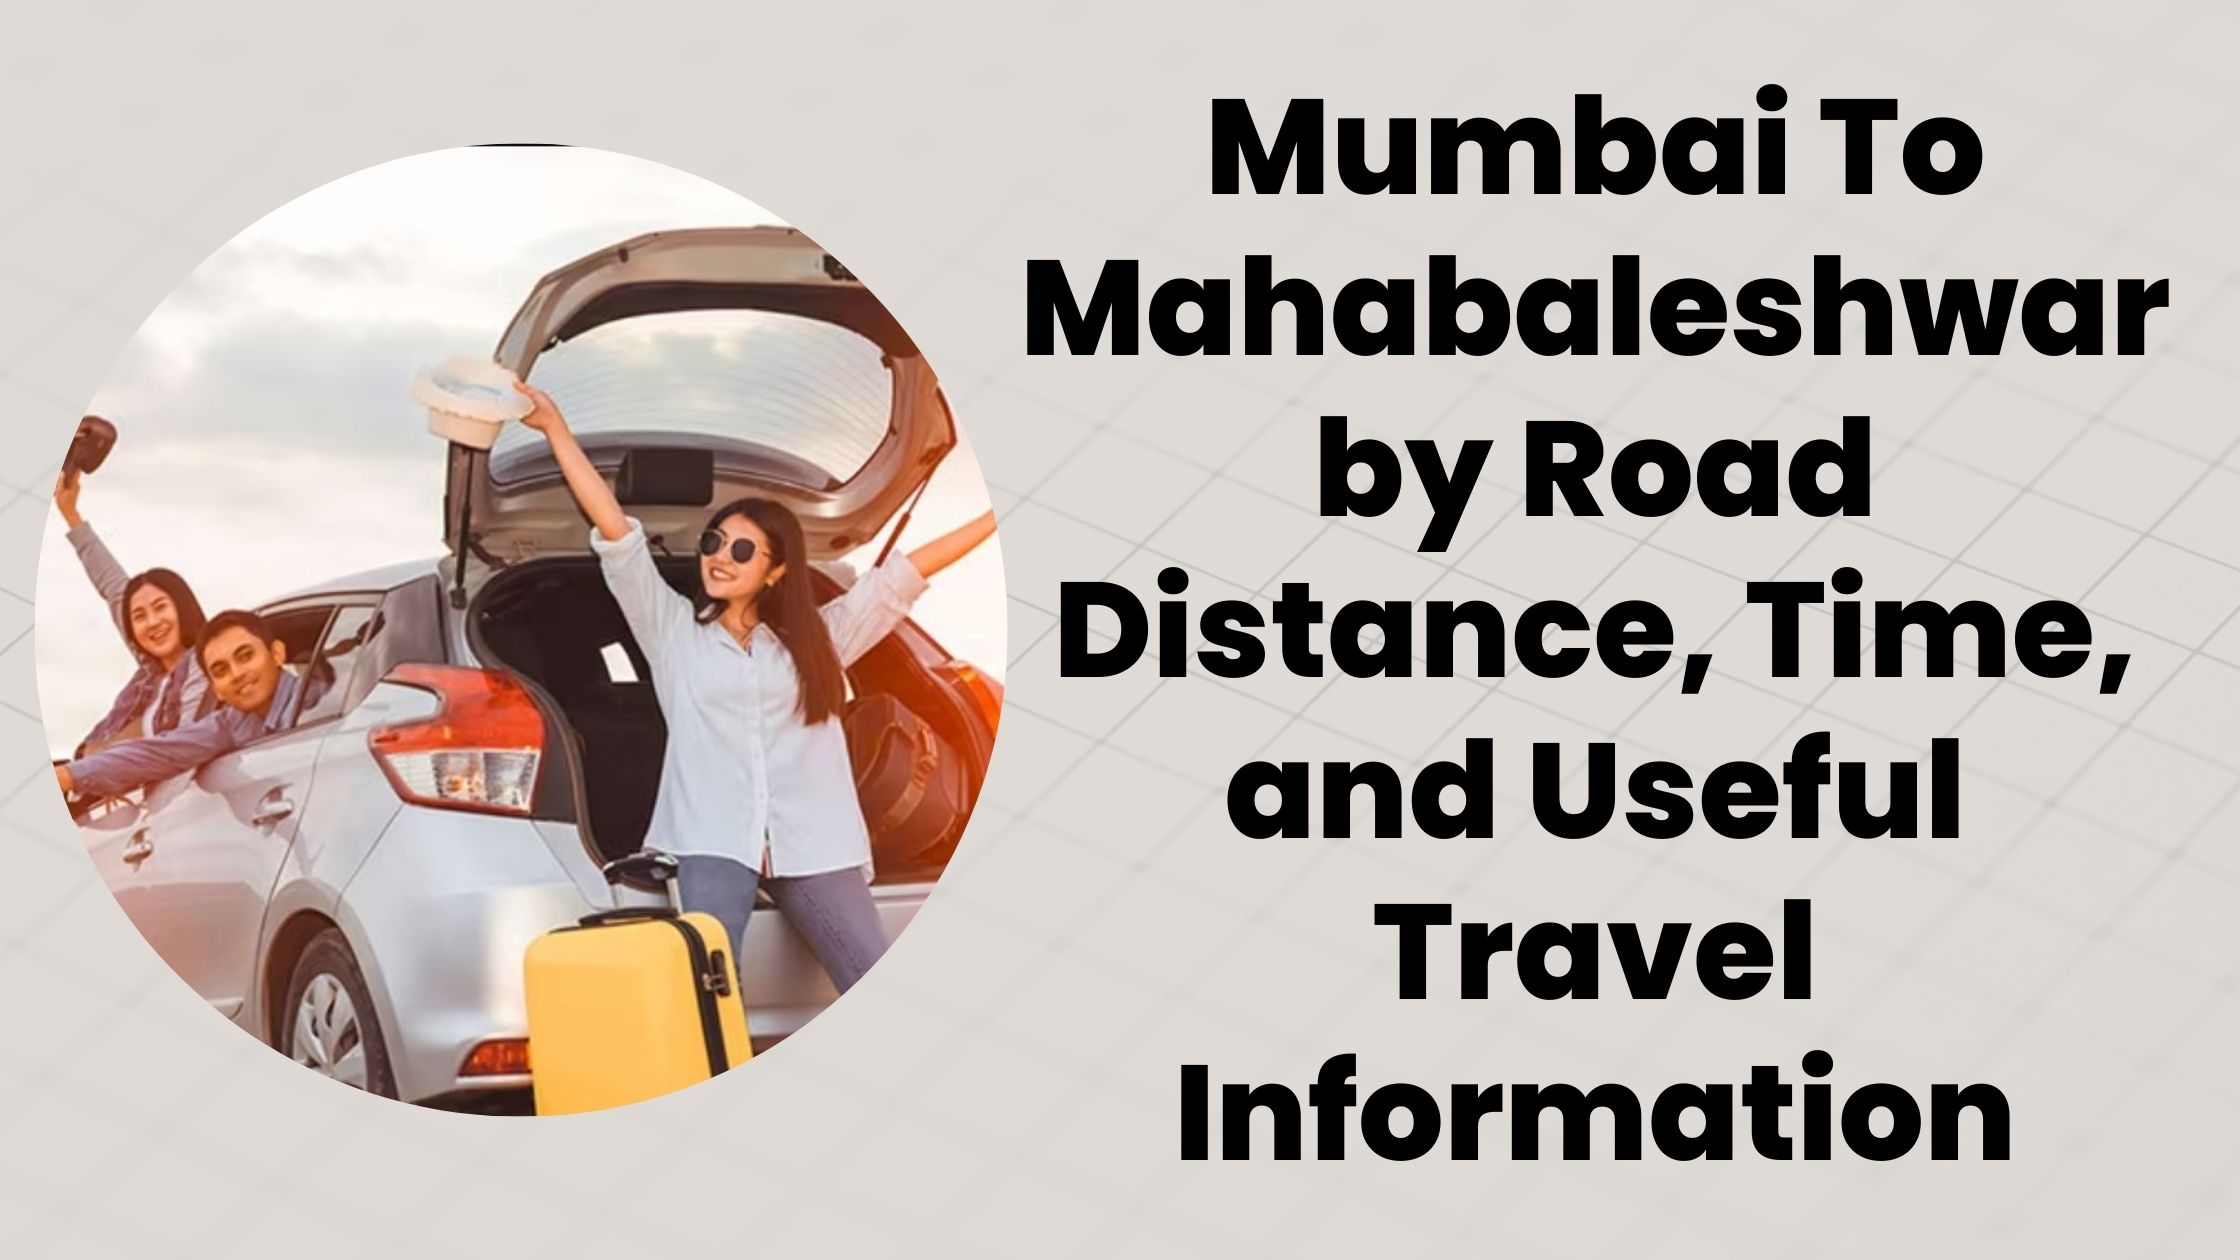 Mumbai To Mahabaleshwar by Road – Distance, Time, and Useful Travel Information